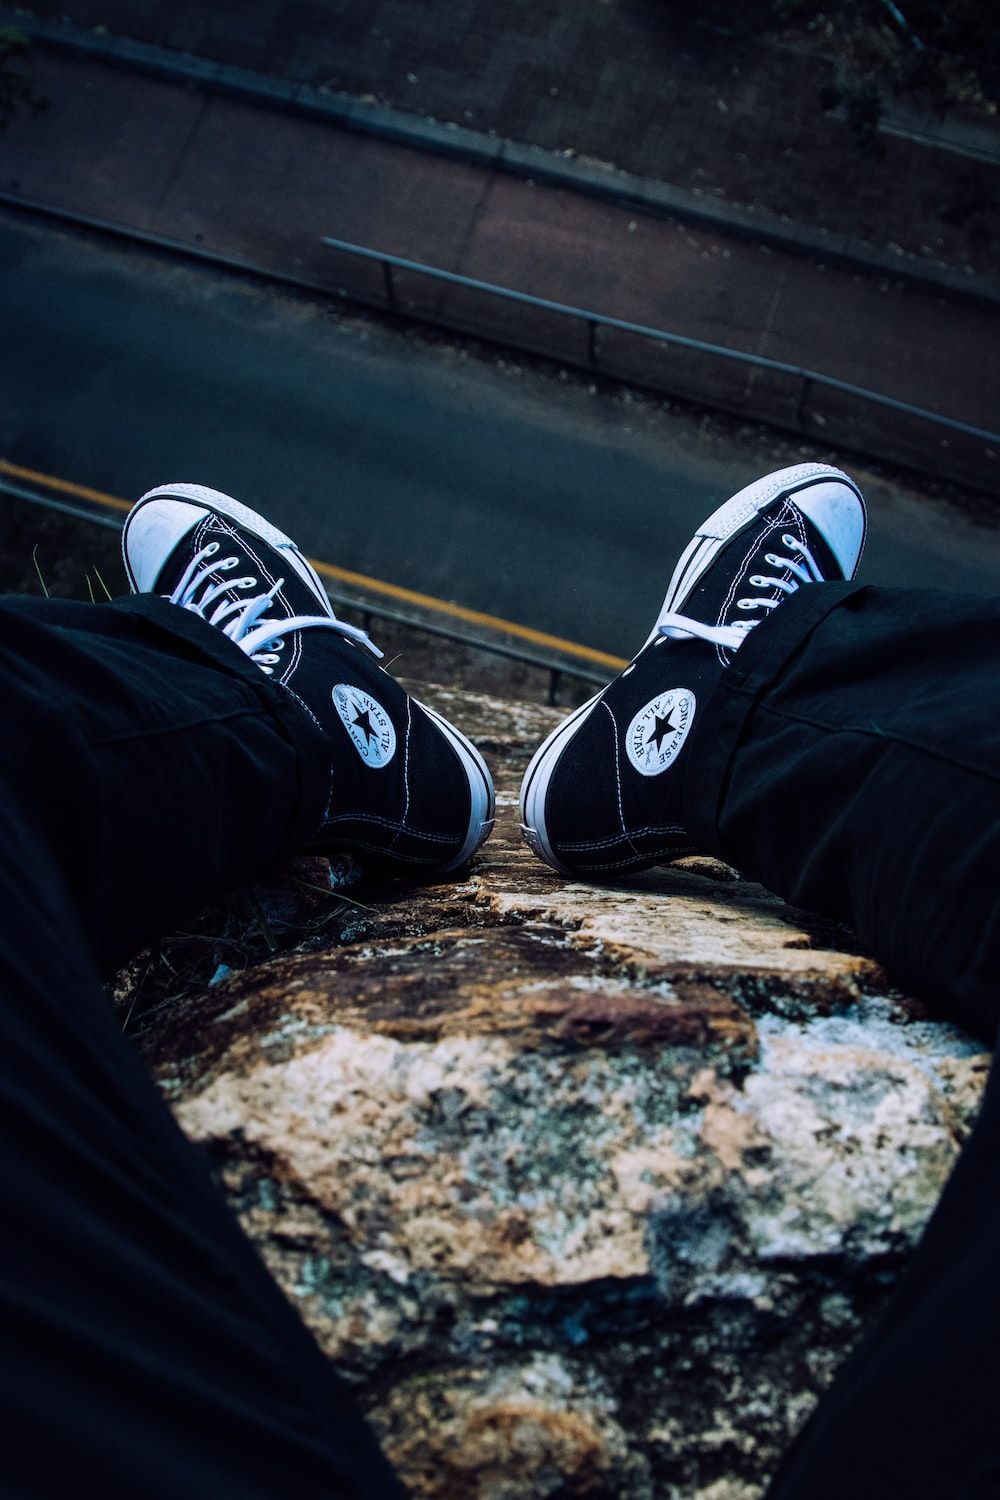 A person wearing black Converse sneakers - Converse